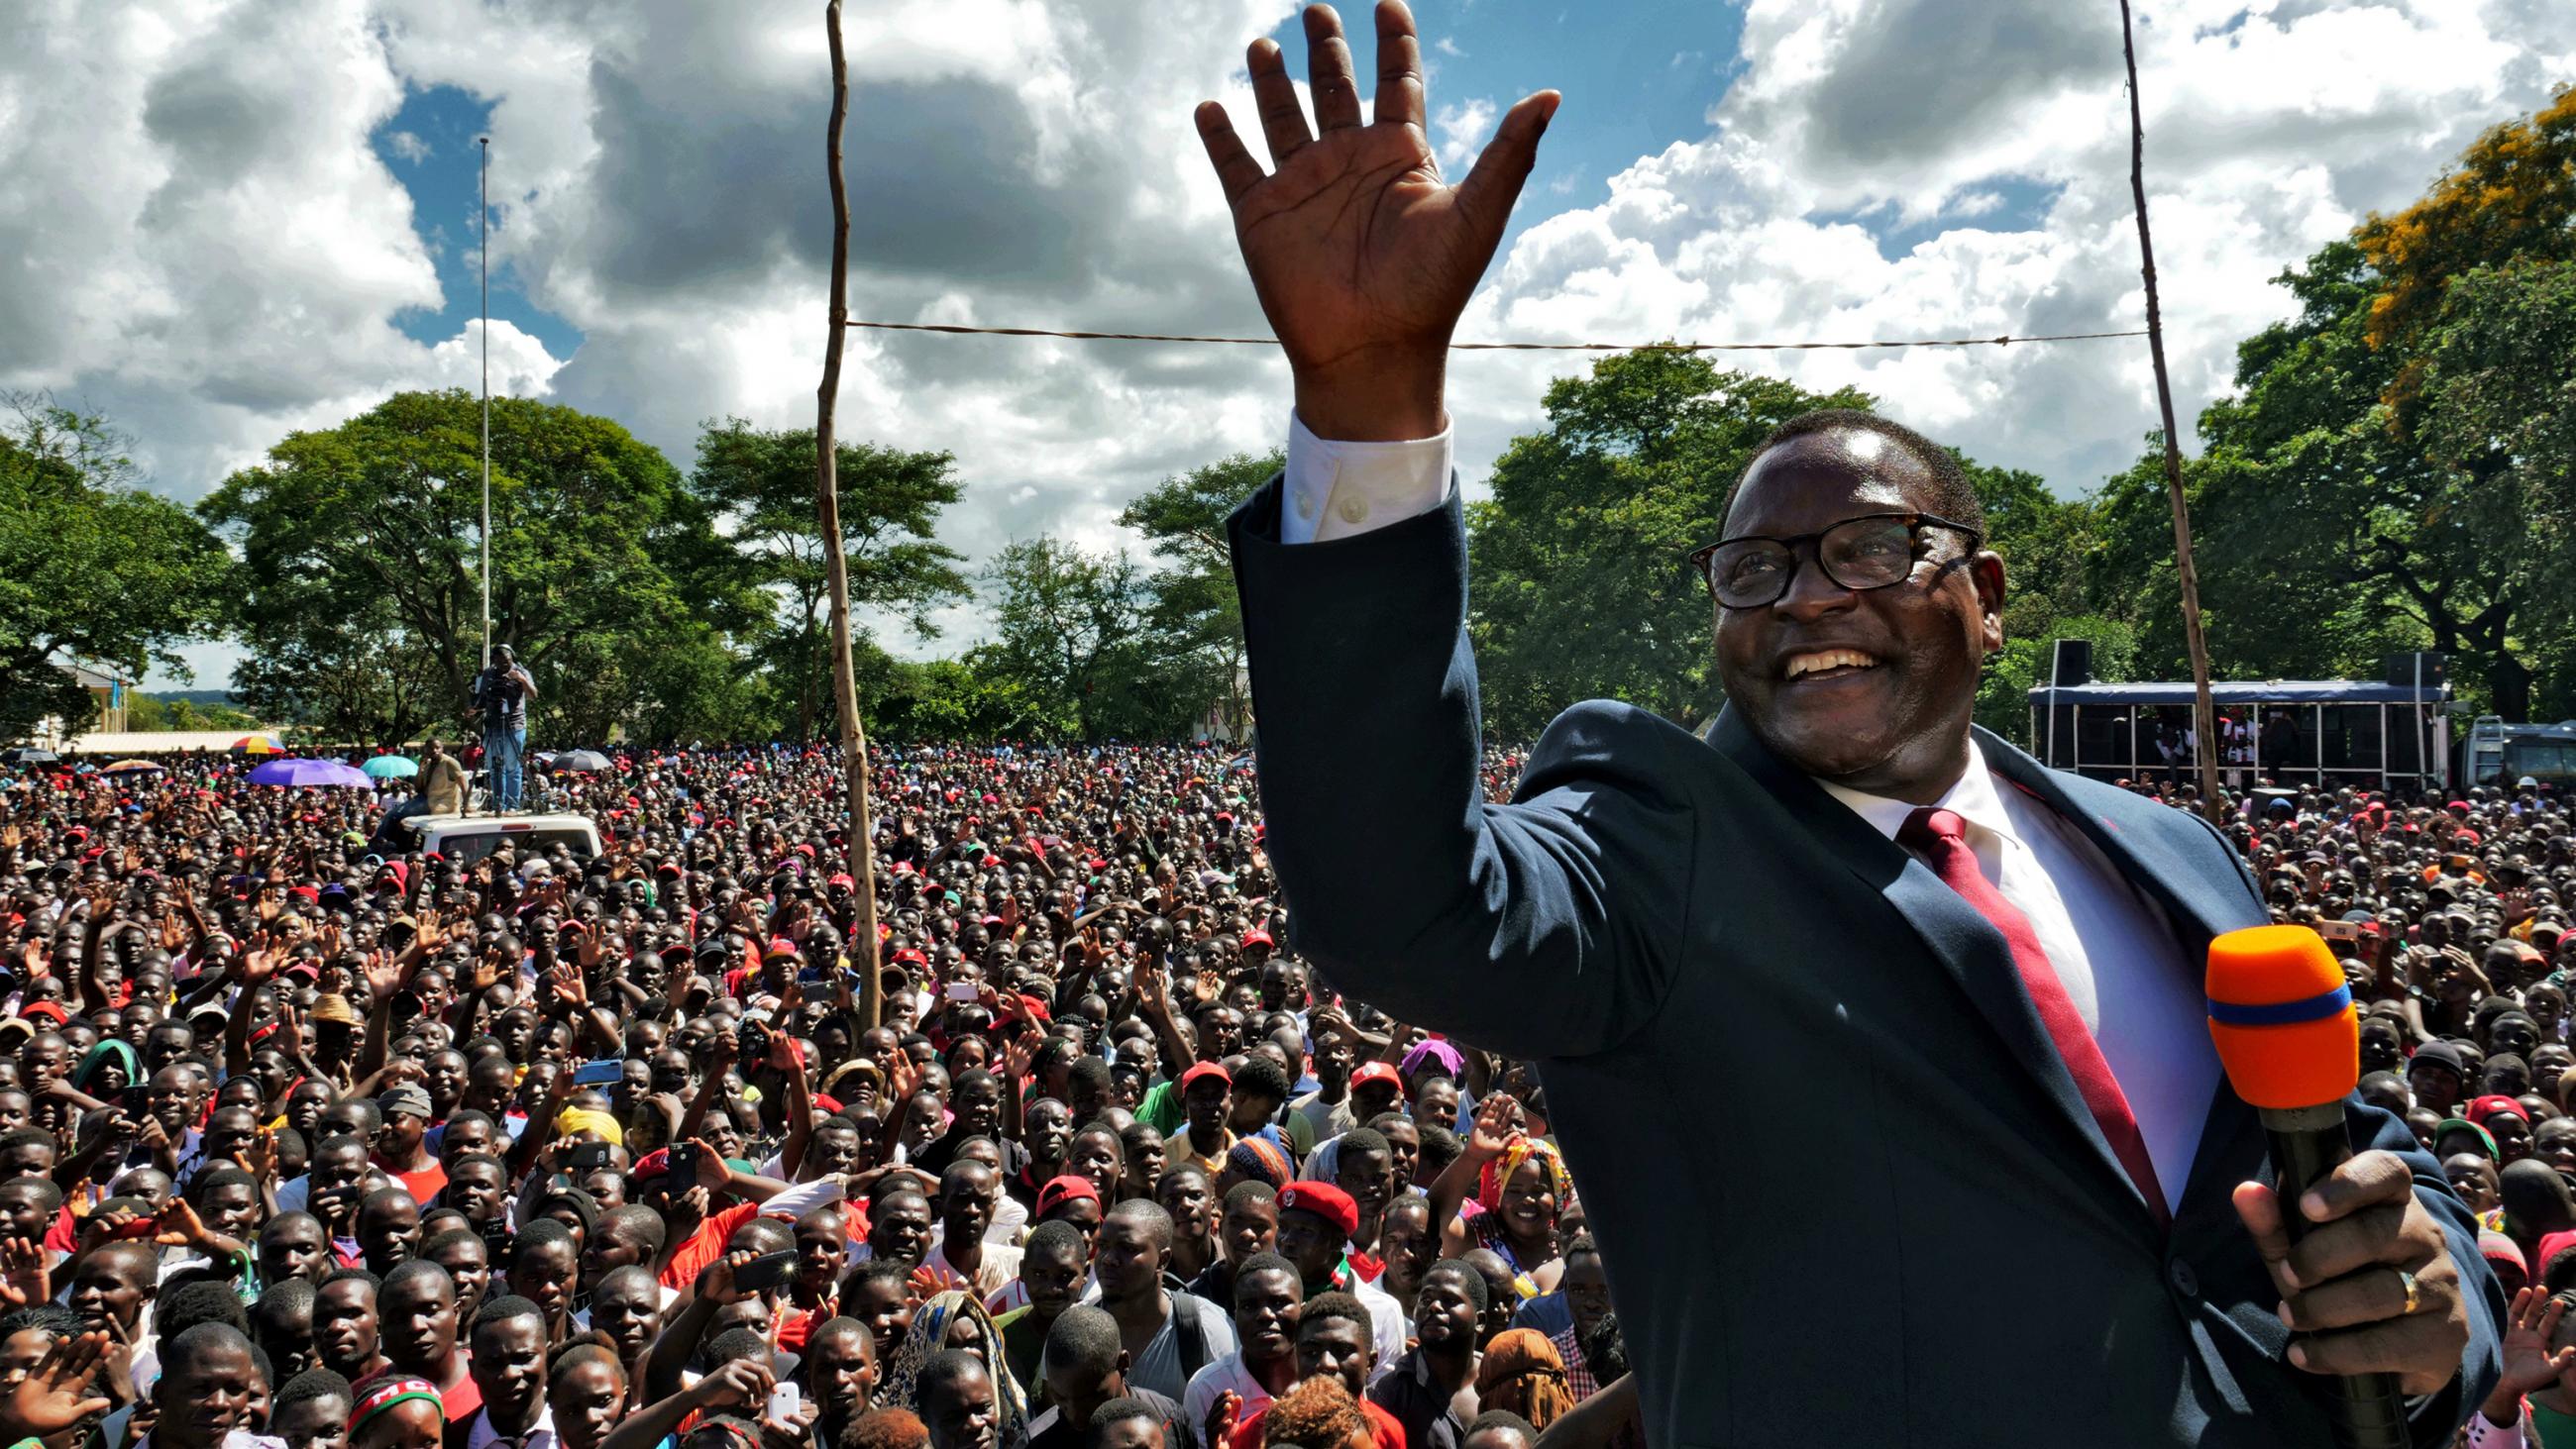 The photo shows a smiling Chakwera, microphone in hand, standing atop a stage waving and smiling. A massive crowd can be seen in the background. 